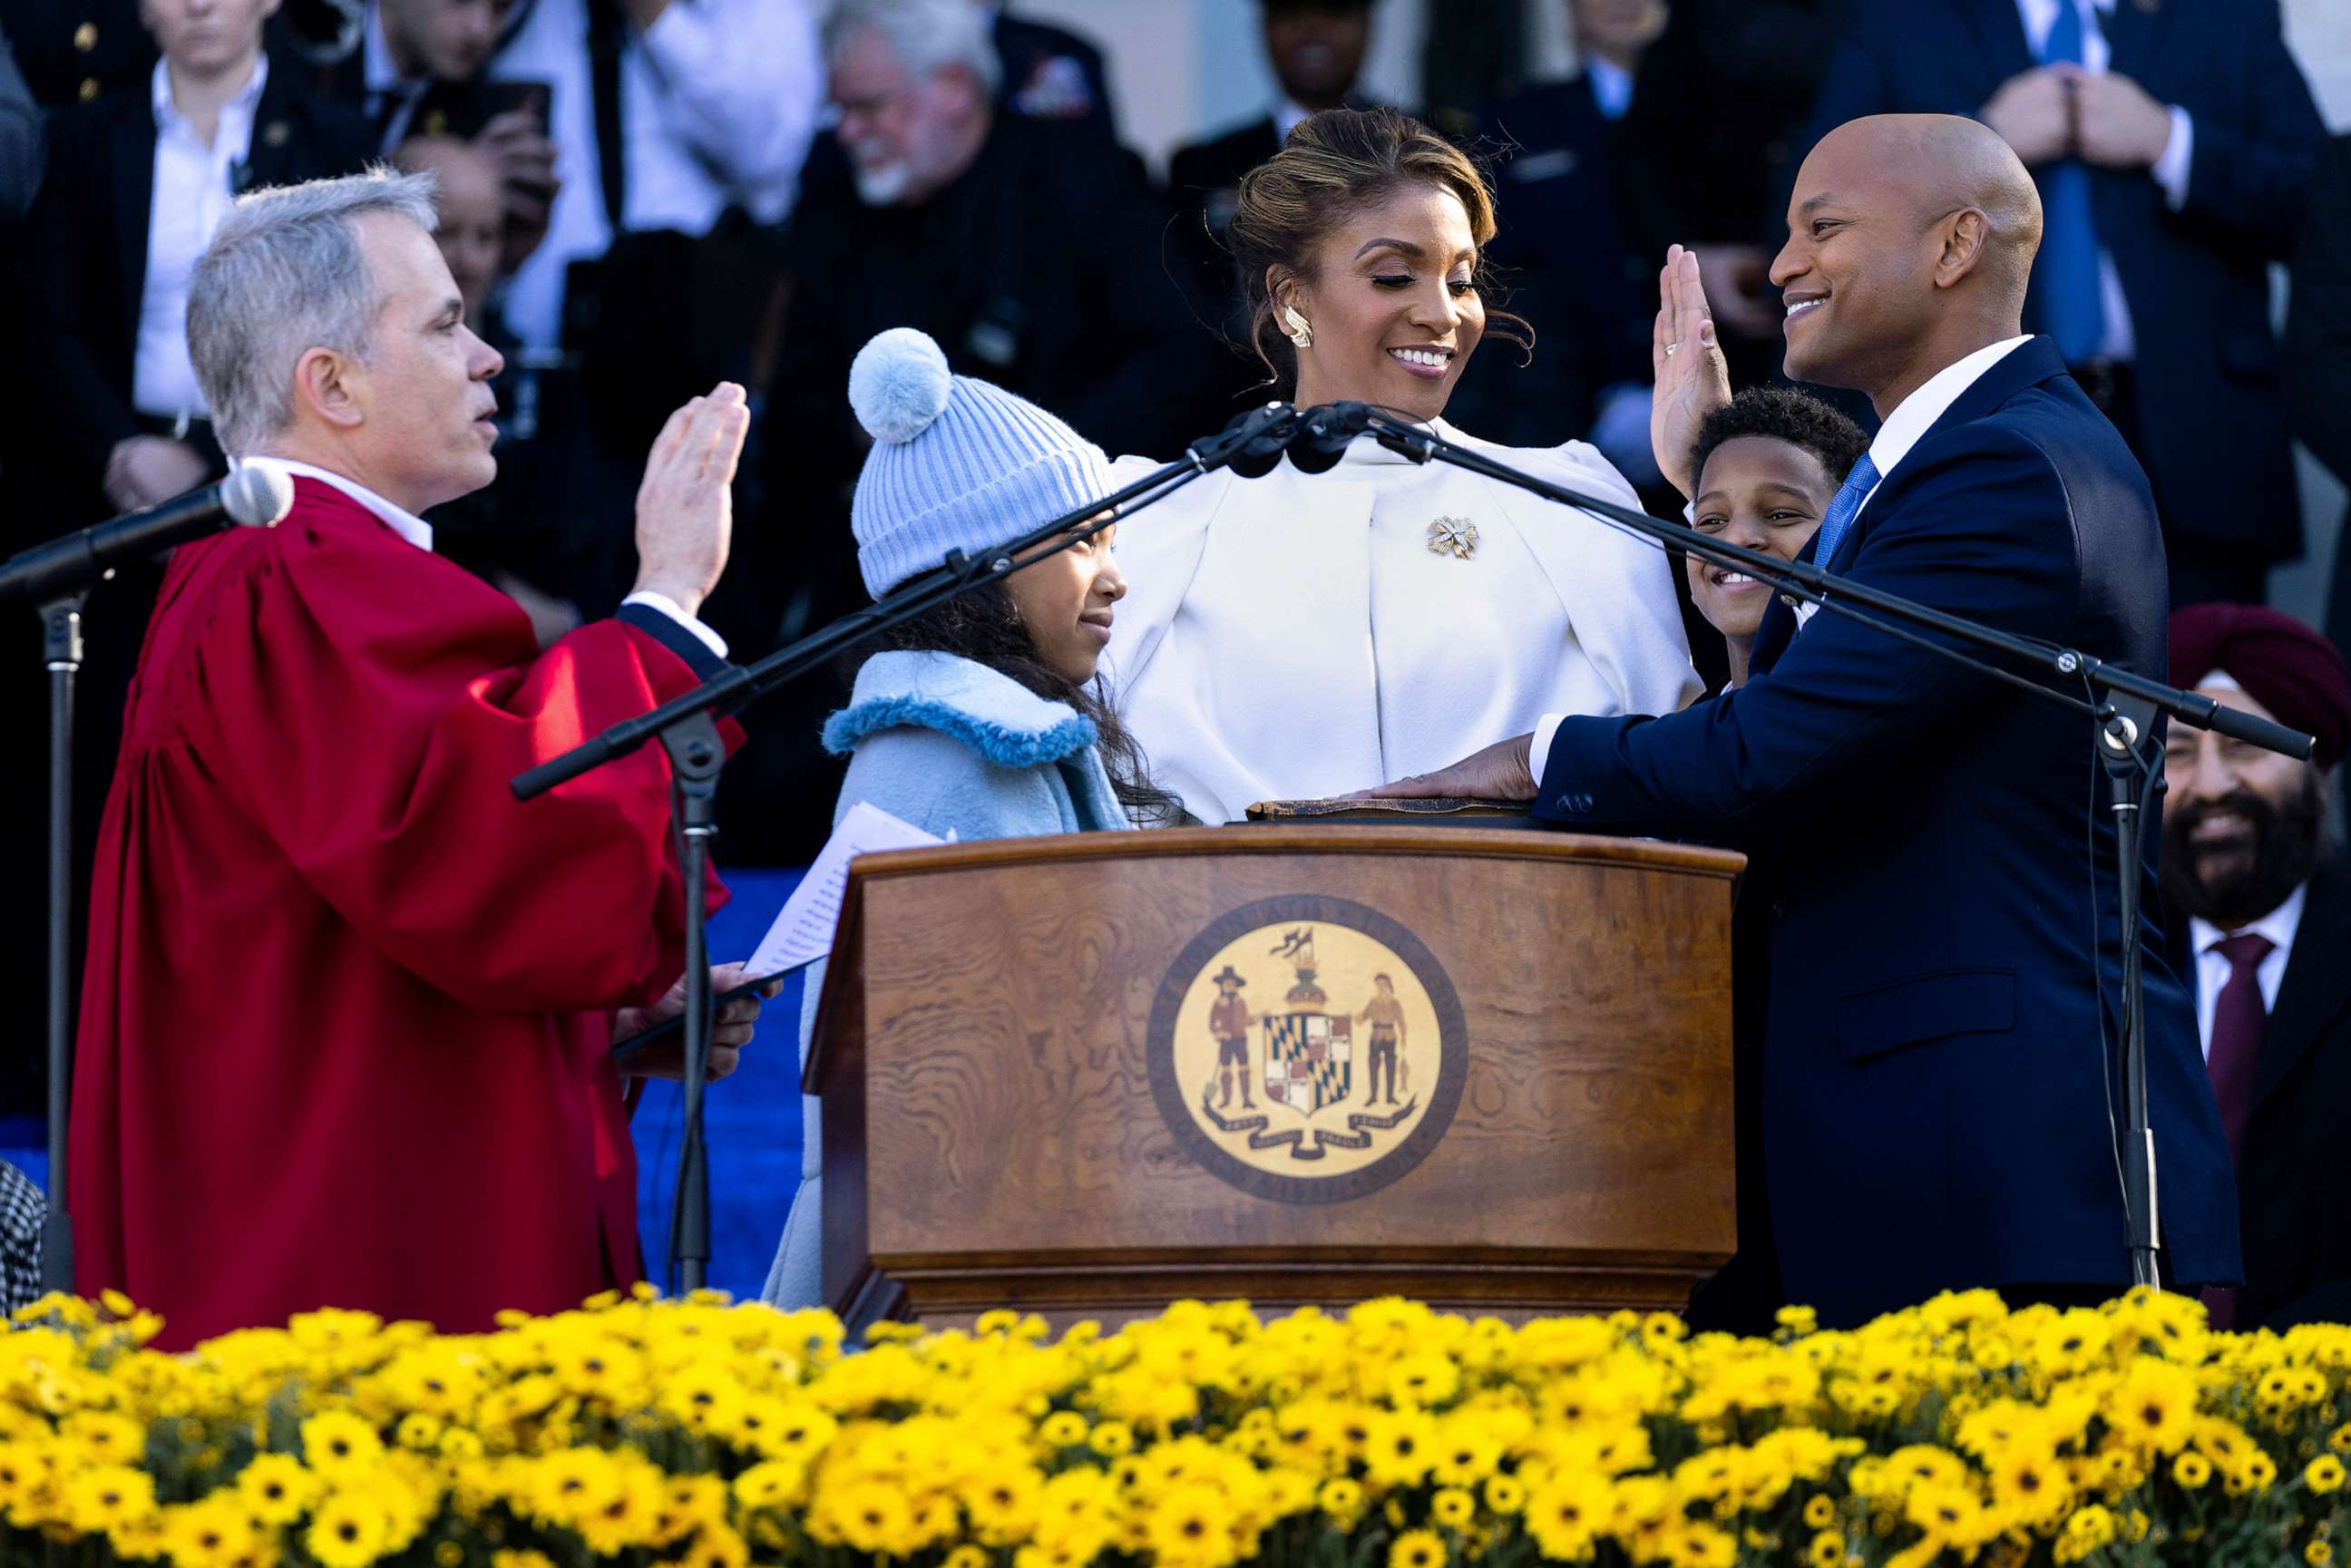 PHOTO: Wes Moore is sworn in as the 63rd governor of the state of Maryland by Maryland Supreme Court Chief Justice Matthew Fader, Jan. 18, 2023, in Annapolis, Md.